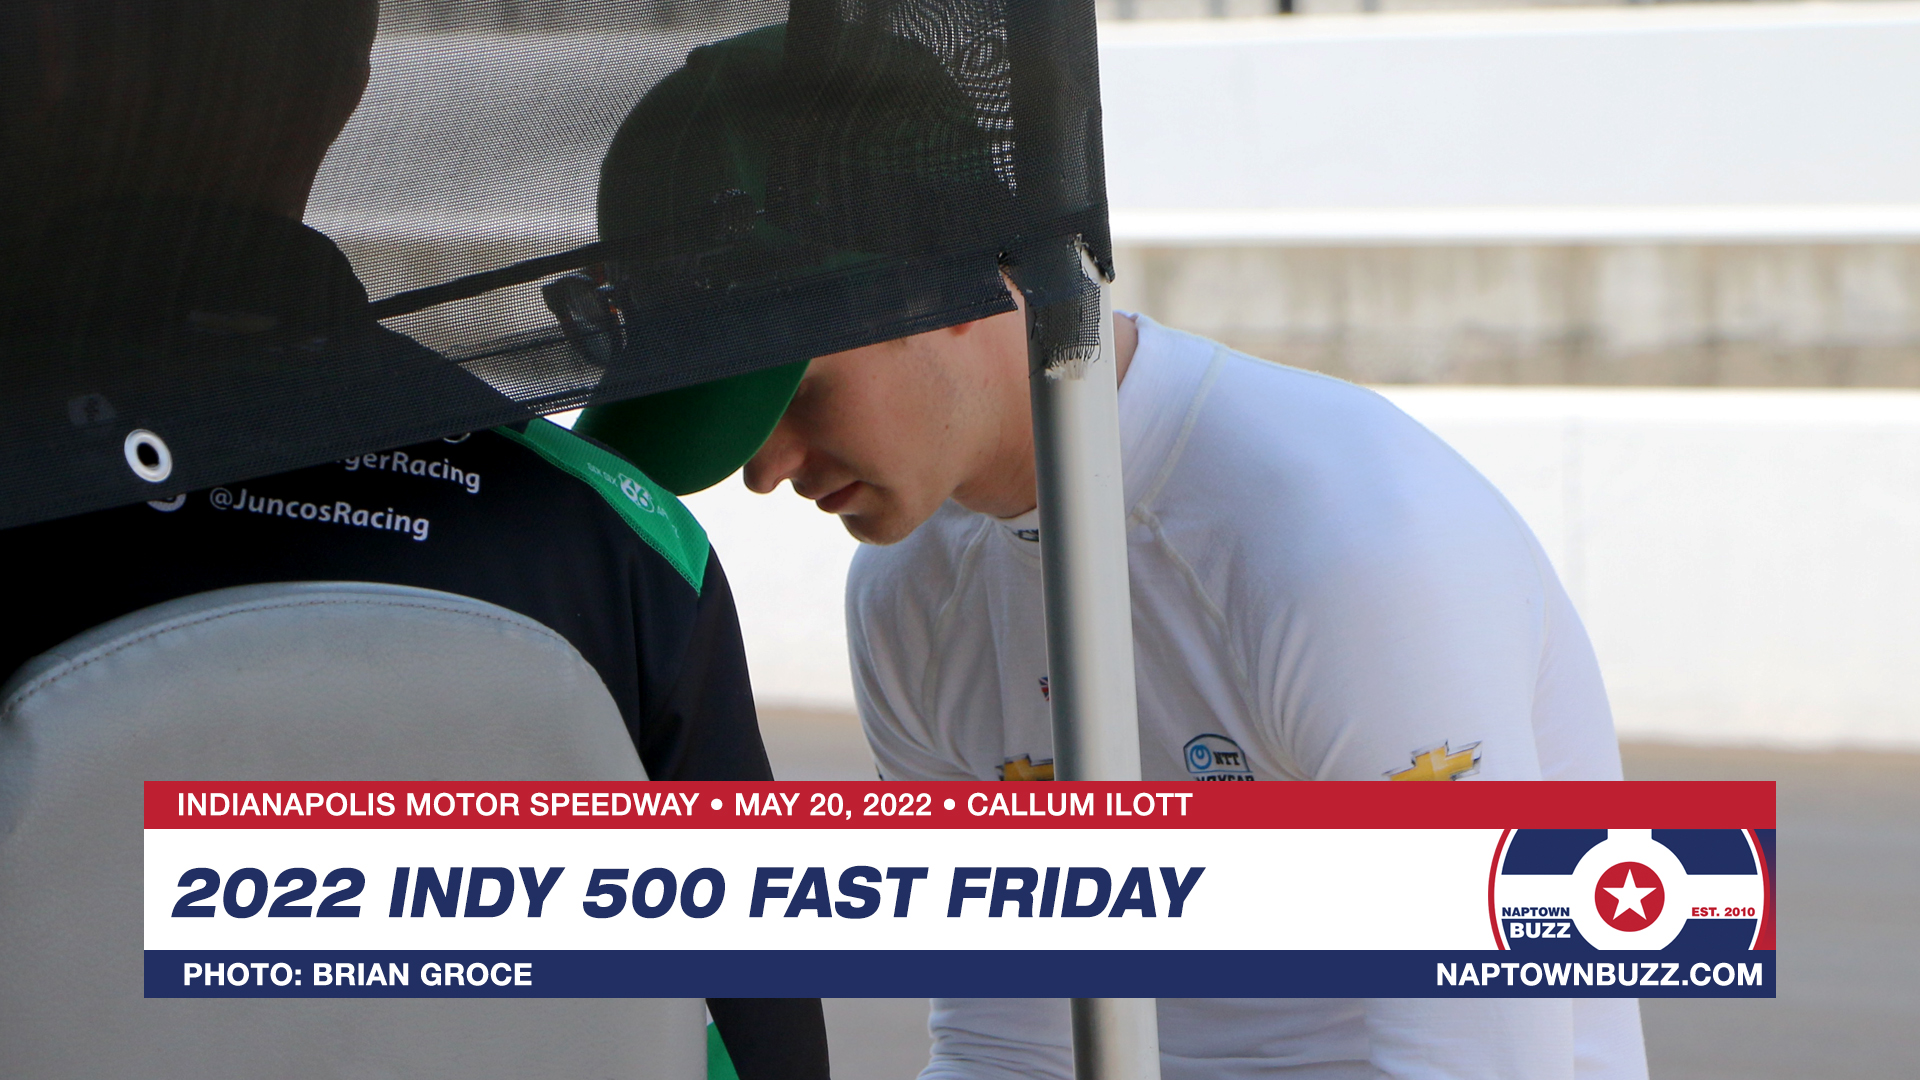 Callum Ilott on Indy 500 Fast Friday Practice at Indianapolis Motor Speedway on May 20, 2022